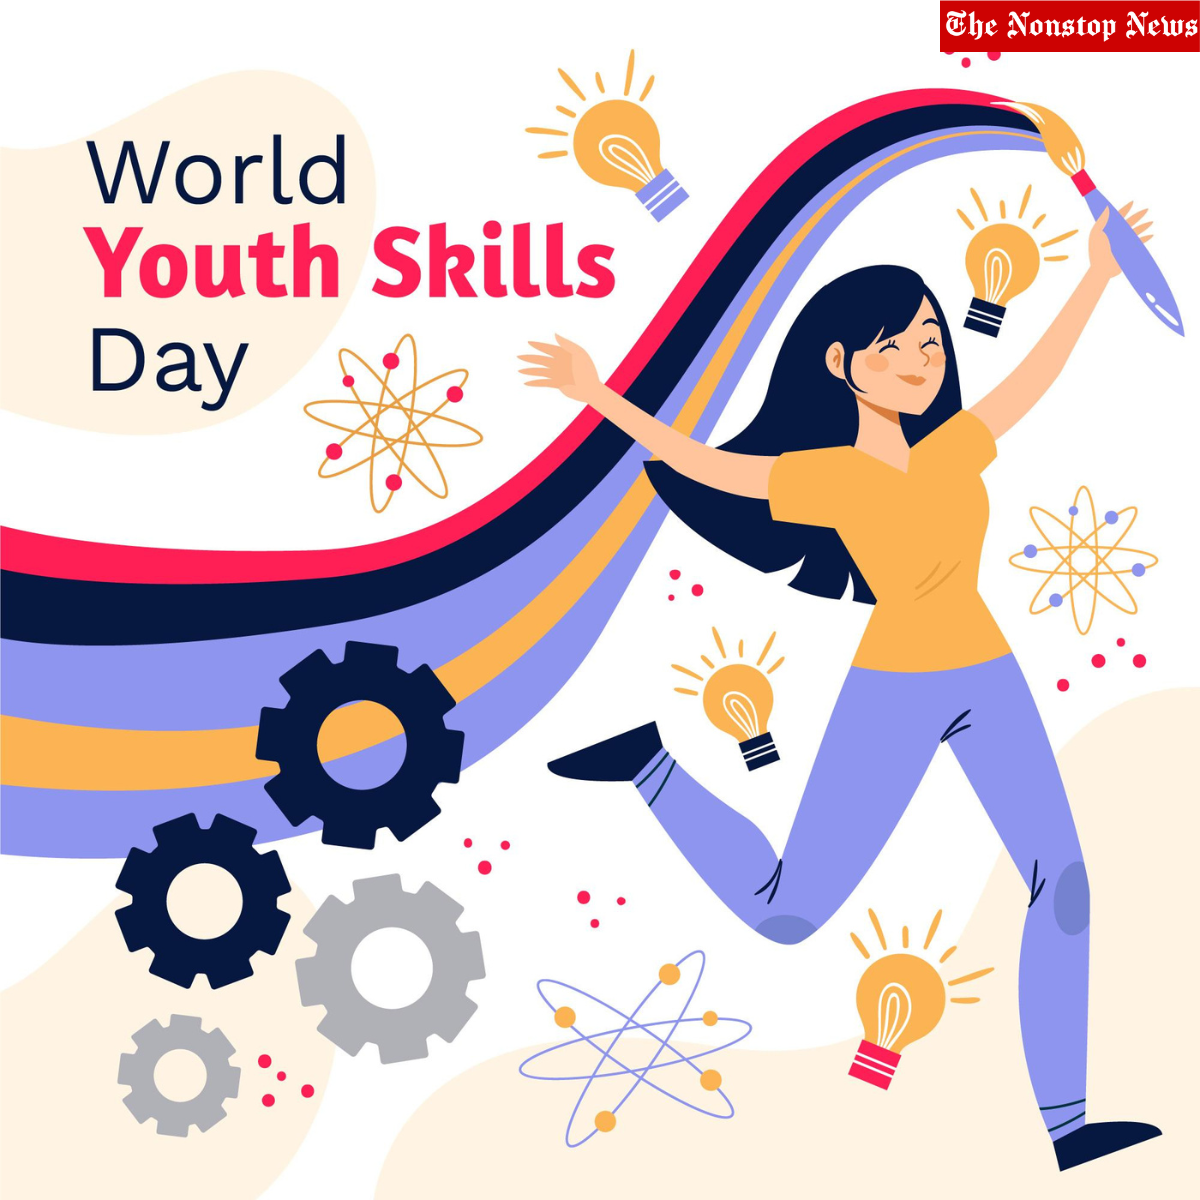 World Youth Skills Day 2022: Theme, Quotes, Wishes, Messages, Greetings, Images, Posters, and Instagram Captions to Share